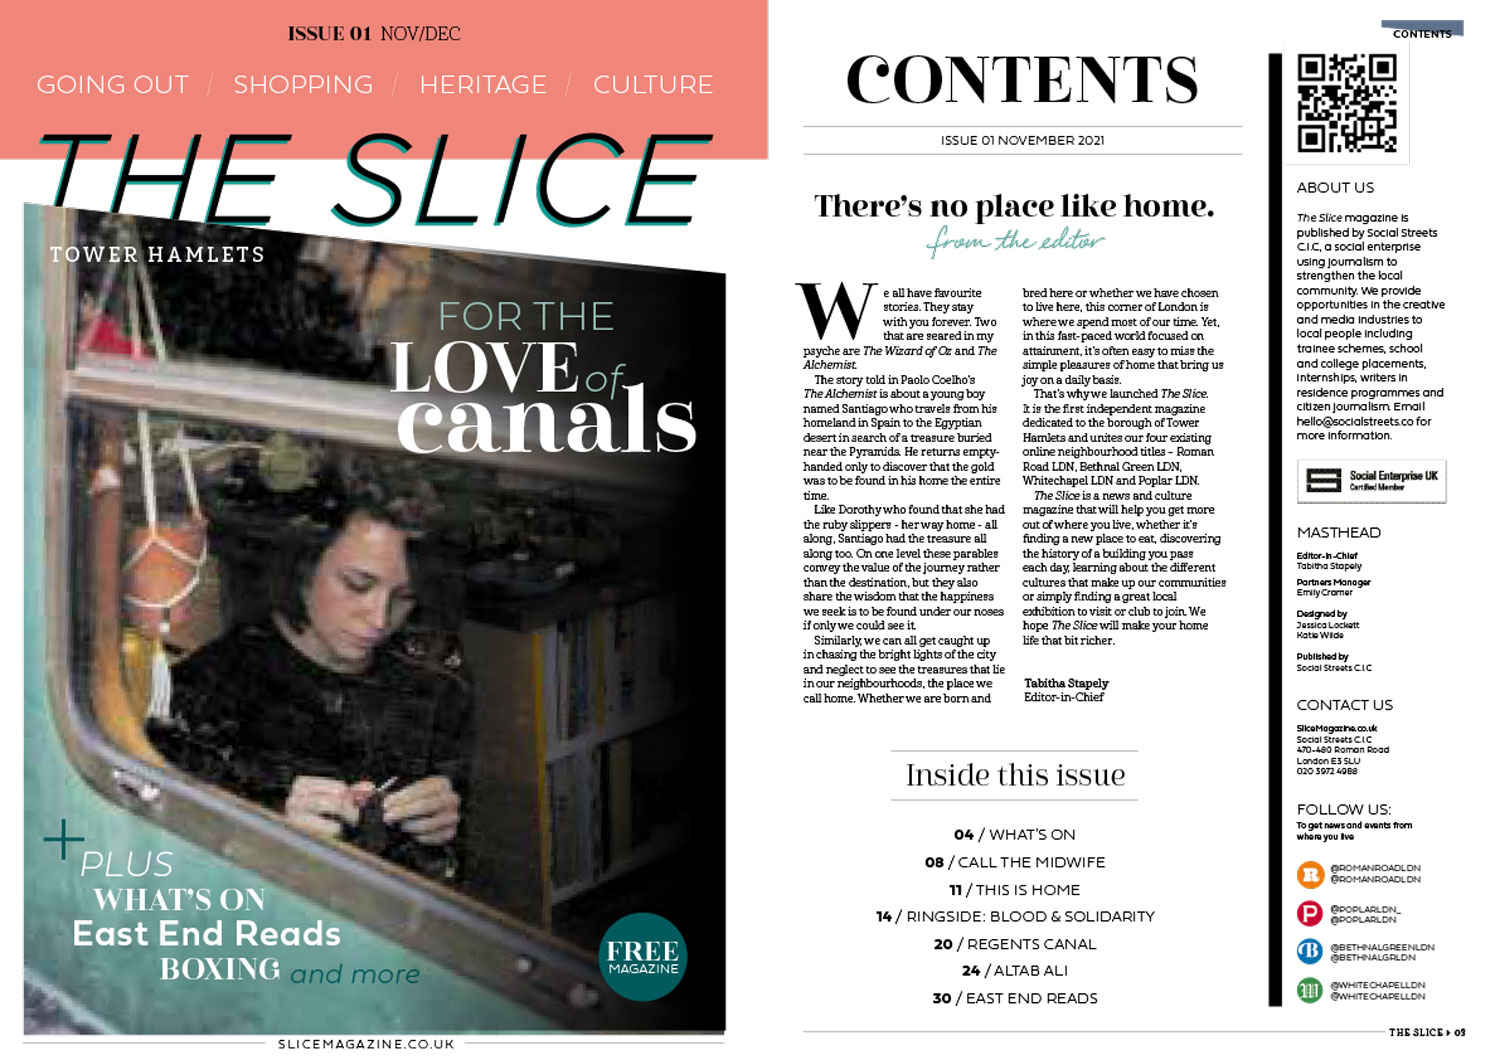 The Slice magazine, cover and contents page.